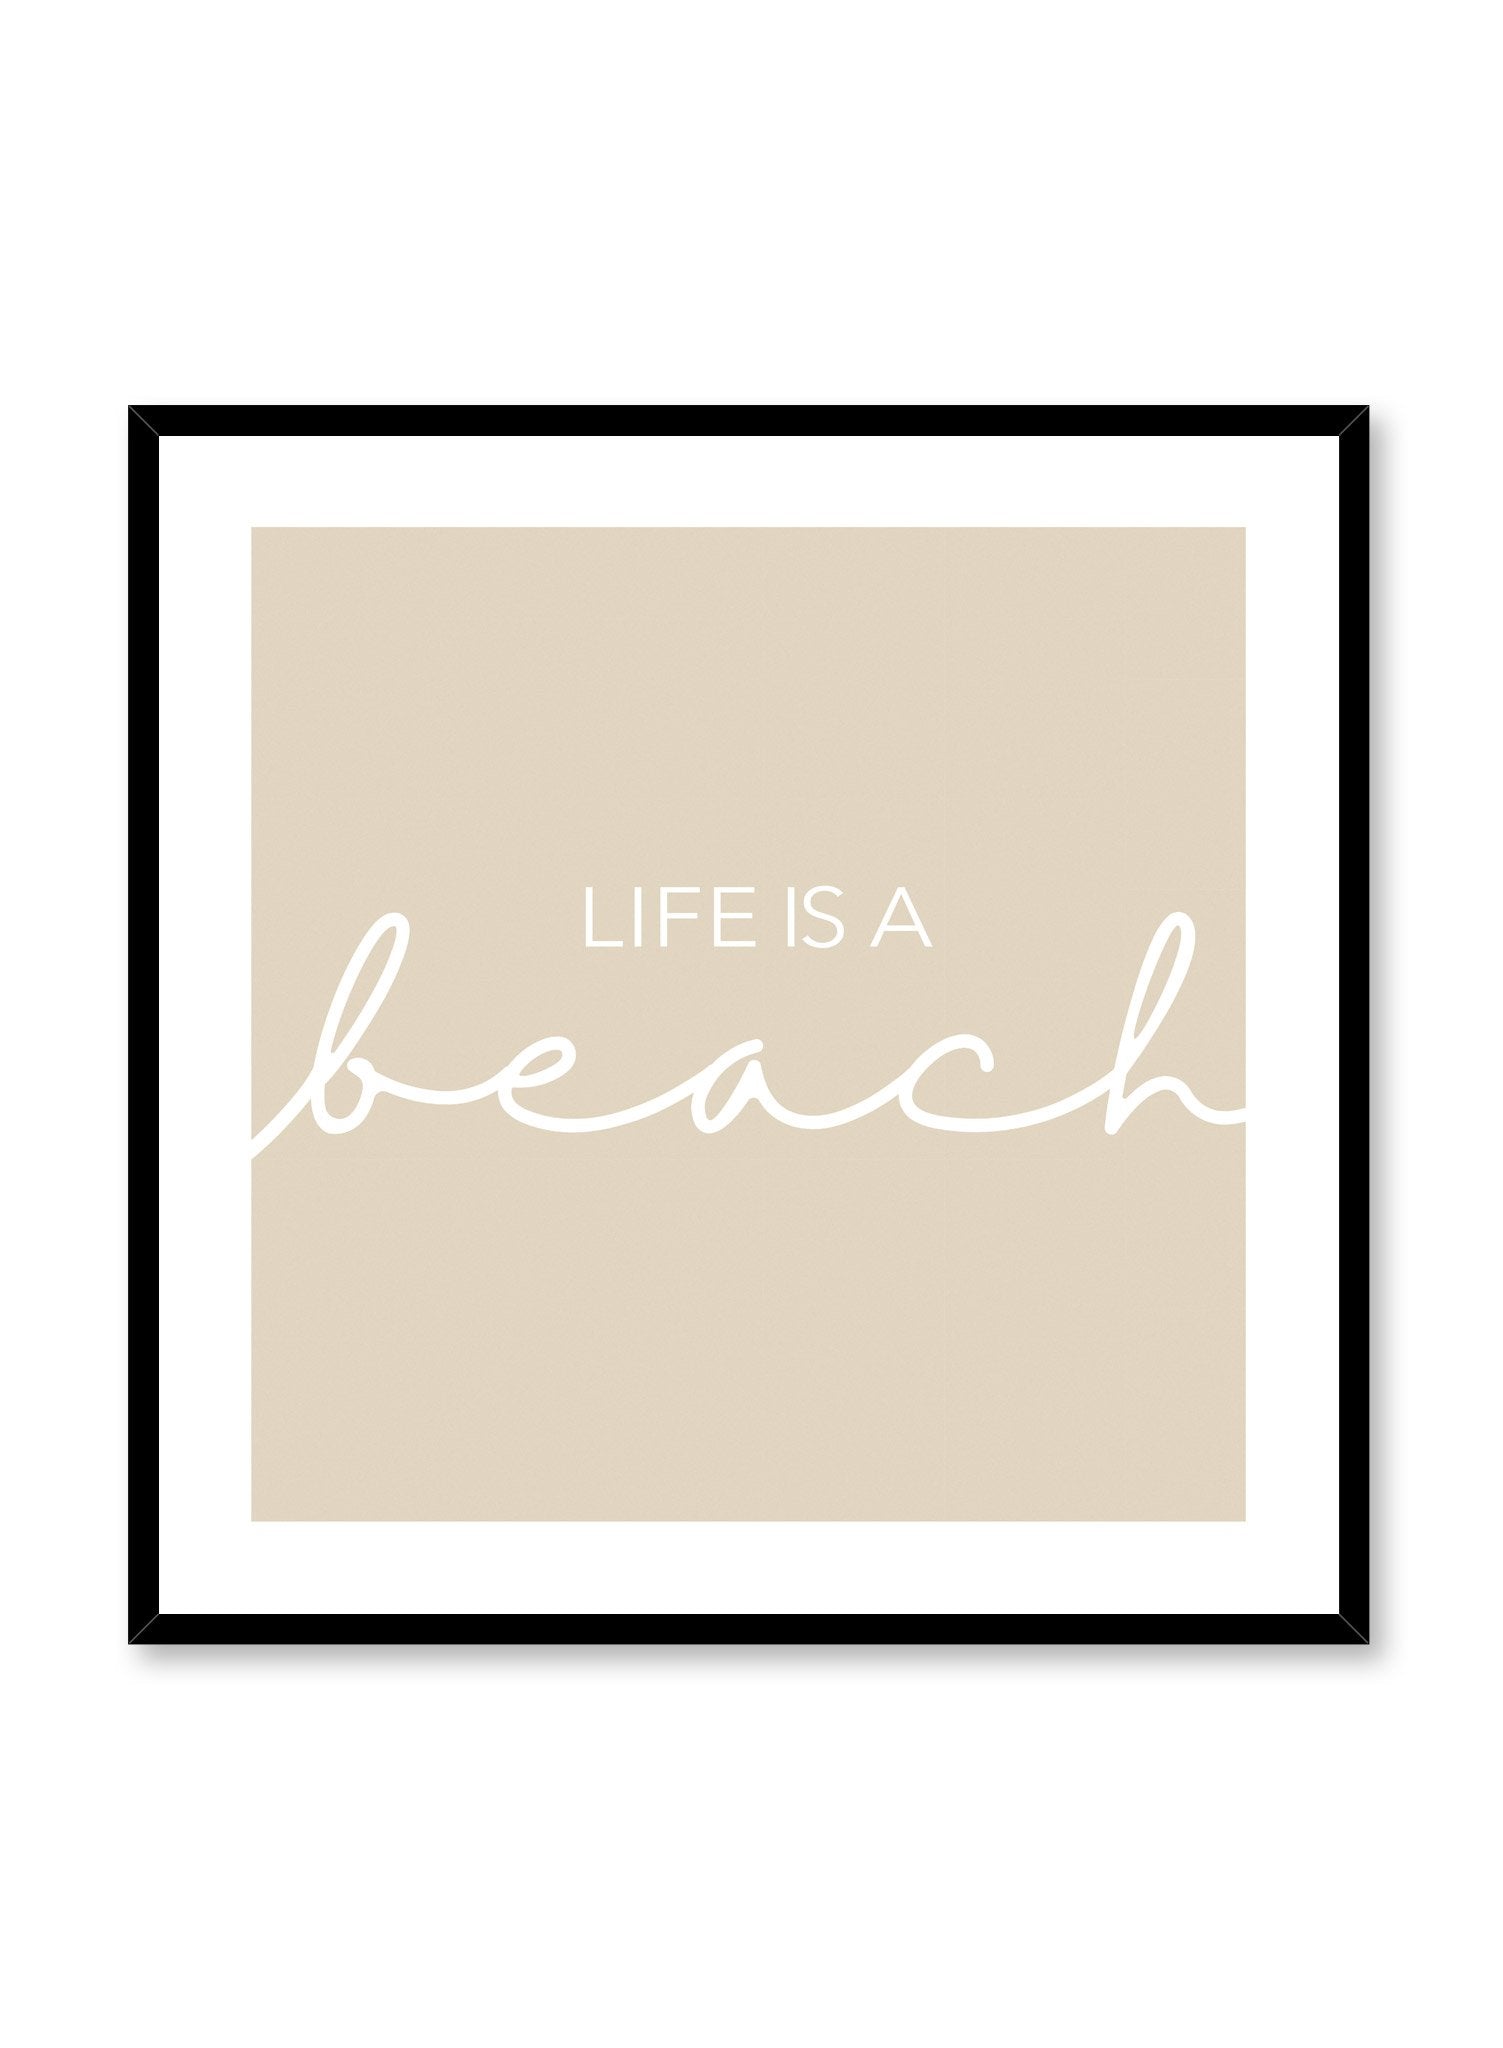 Life is a beach modern minimalist typography art print by Opposite Wall